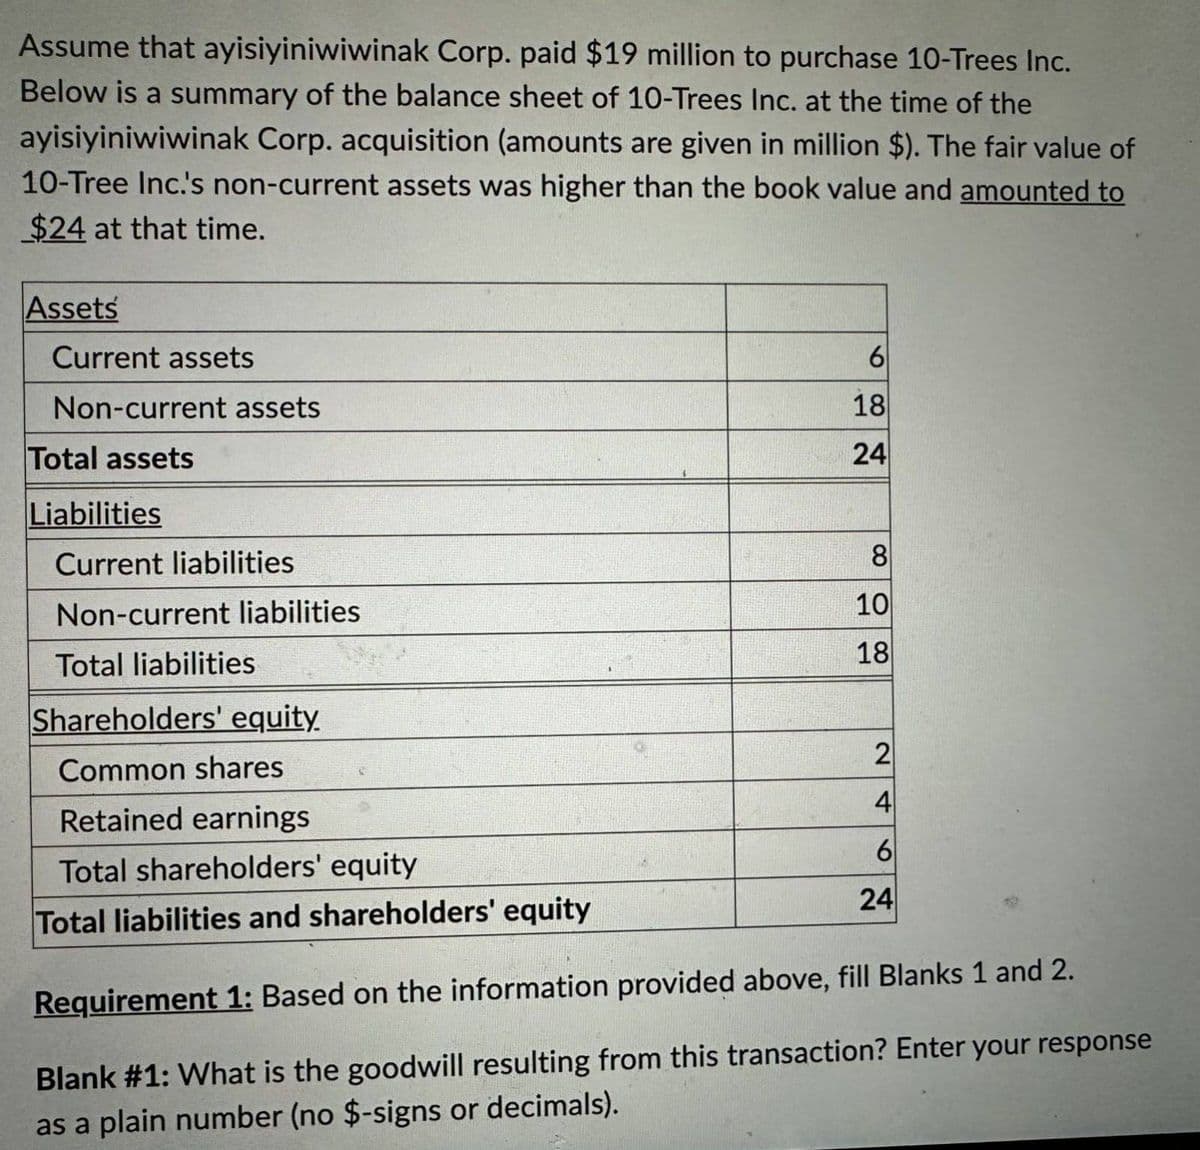 Assume that ayisiyiniwiwinak Corp. paid $19 million to purchase 10-Trees Inc.
Below is a summary of the balance sheet of 10-Trees Inc. at the time of the
ayisiyiniwiwinak Corp. acquisition (amounts are given in million $). The fair value of
10-Tree Inc.'s non-current assets was higher than the book value and amounted to
$24 at that time.
Assets
Current assets
Non-current assets
Total assets
6
18
24
Liabilities
Current liabilities
Non-current liabilities
Total liabilities
Shareholders' equity
Common shares
Retained earnings
Total shareholders' equity
Total liabilities and shareholders' equity
8
10
18
2
4
6
24
Requirement 1: Based on the information provided above, fill Blanks 1 and 2.
Blank #1: What is the goodwill resulting from this transaction? Enter your response
as a plain number (no $-signs or decimals).